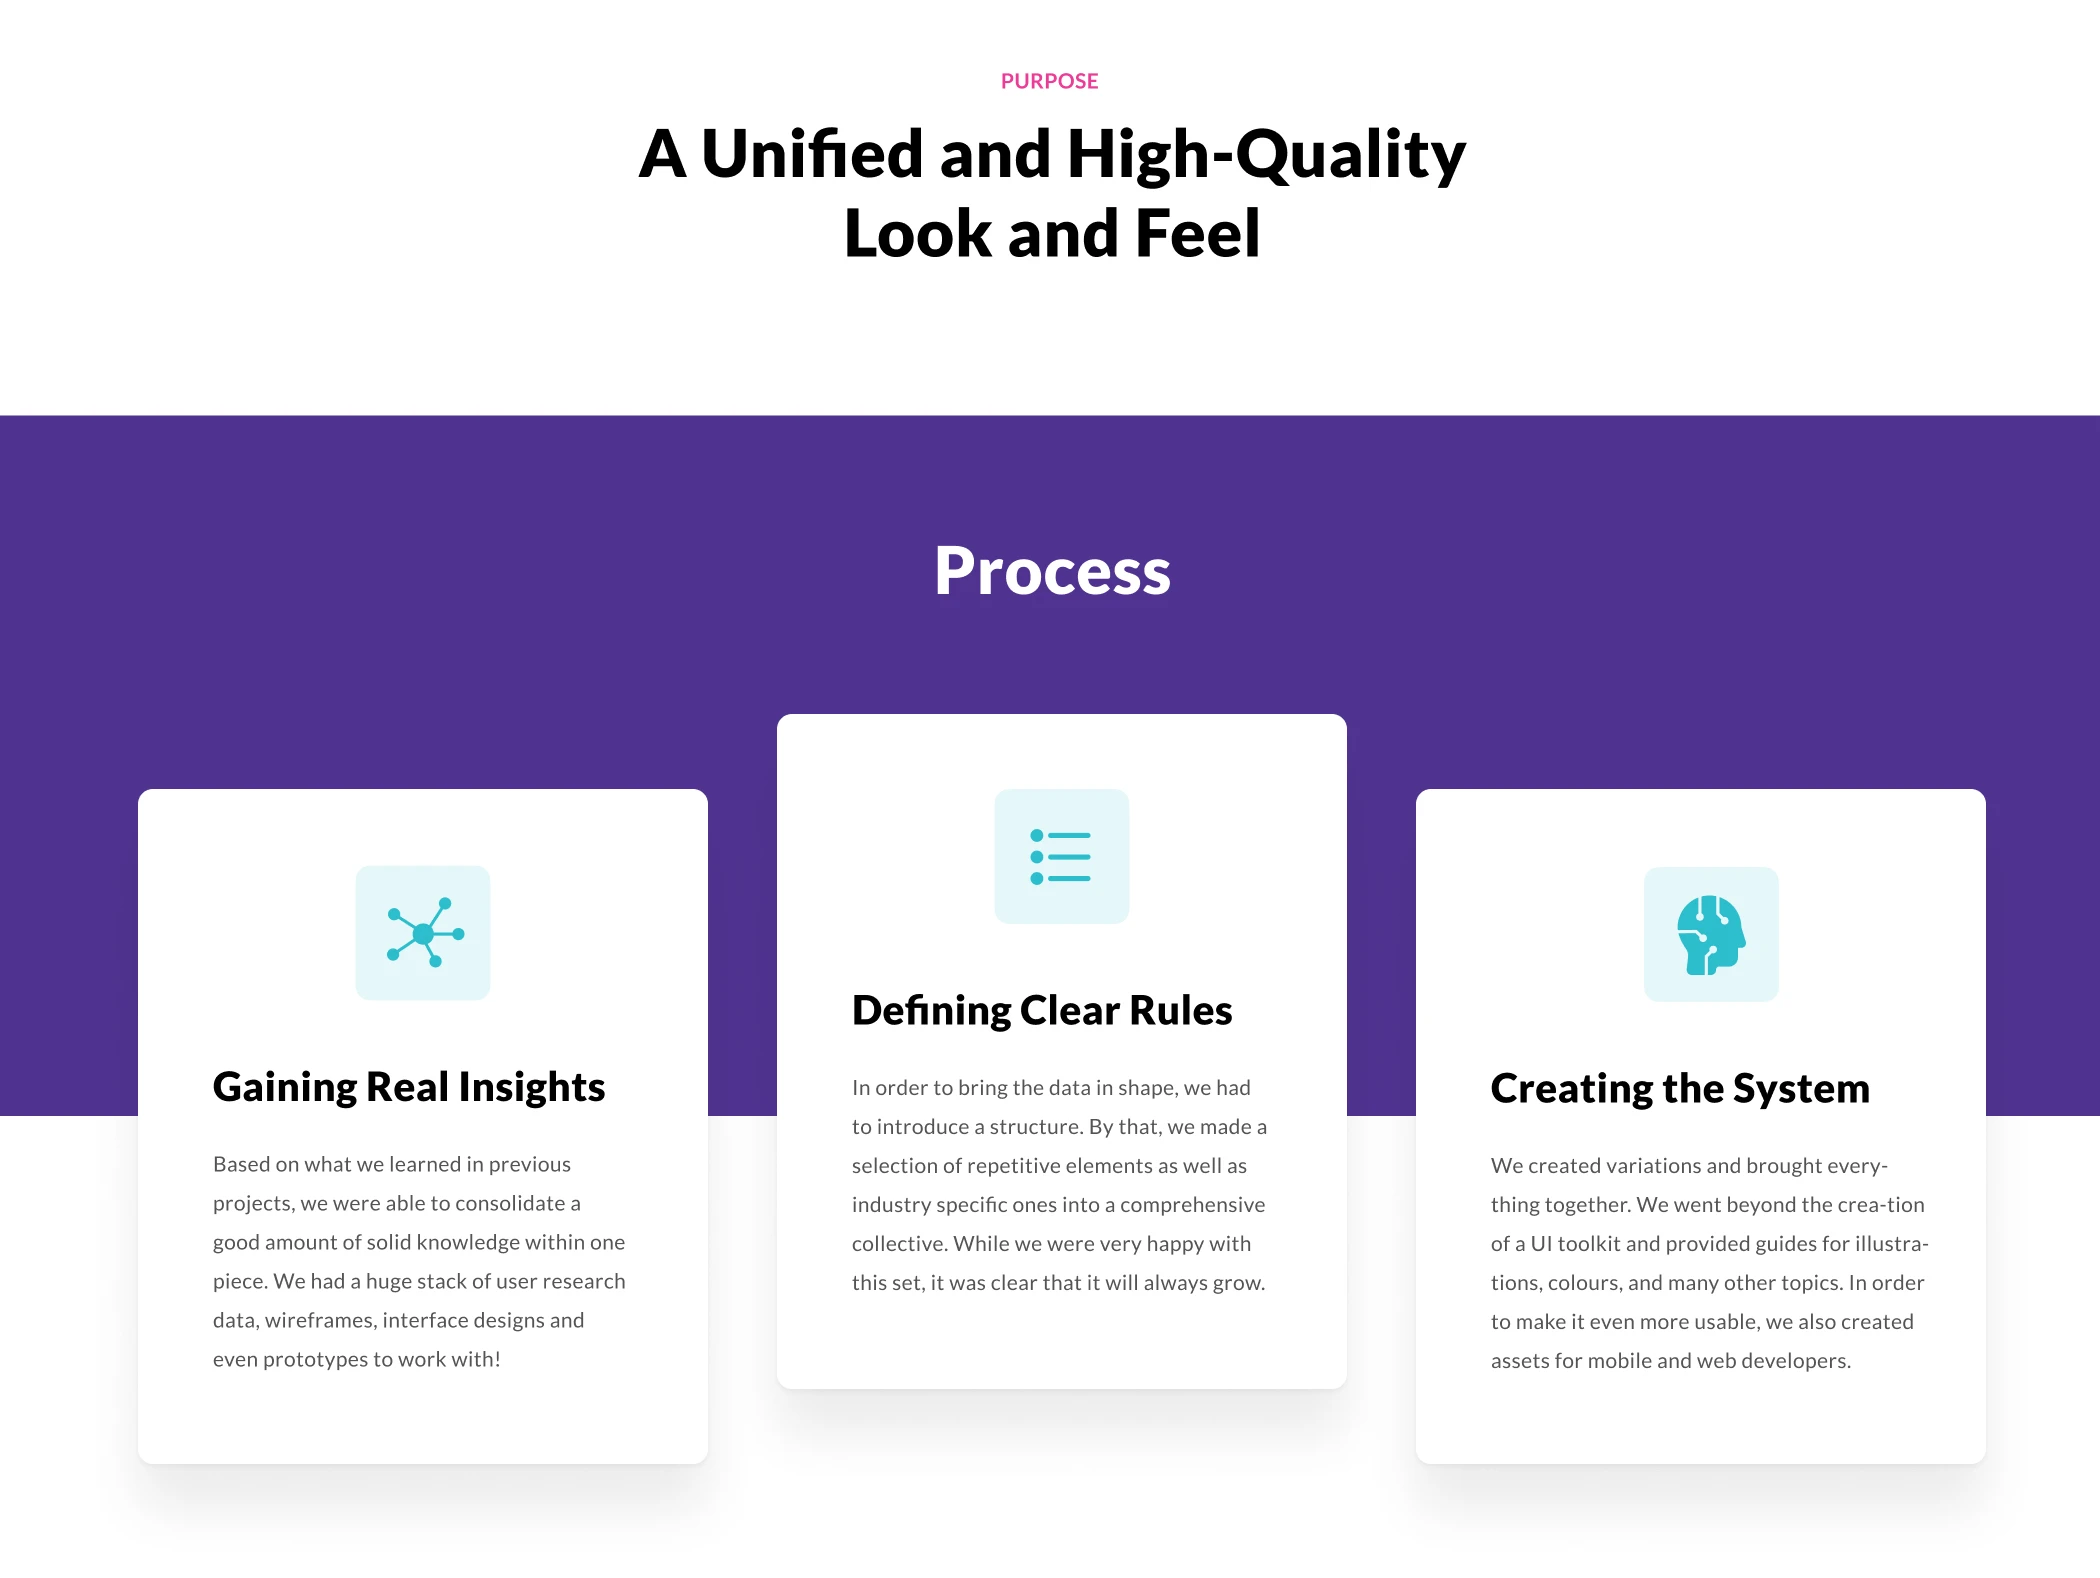 Liquid Design System - Use Liquid to create and develop digital products to make science faster, treatments more personalized, and everyday work more enjoyable.